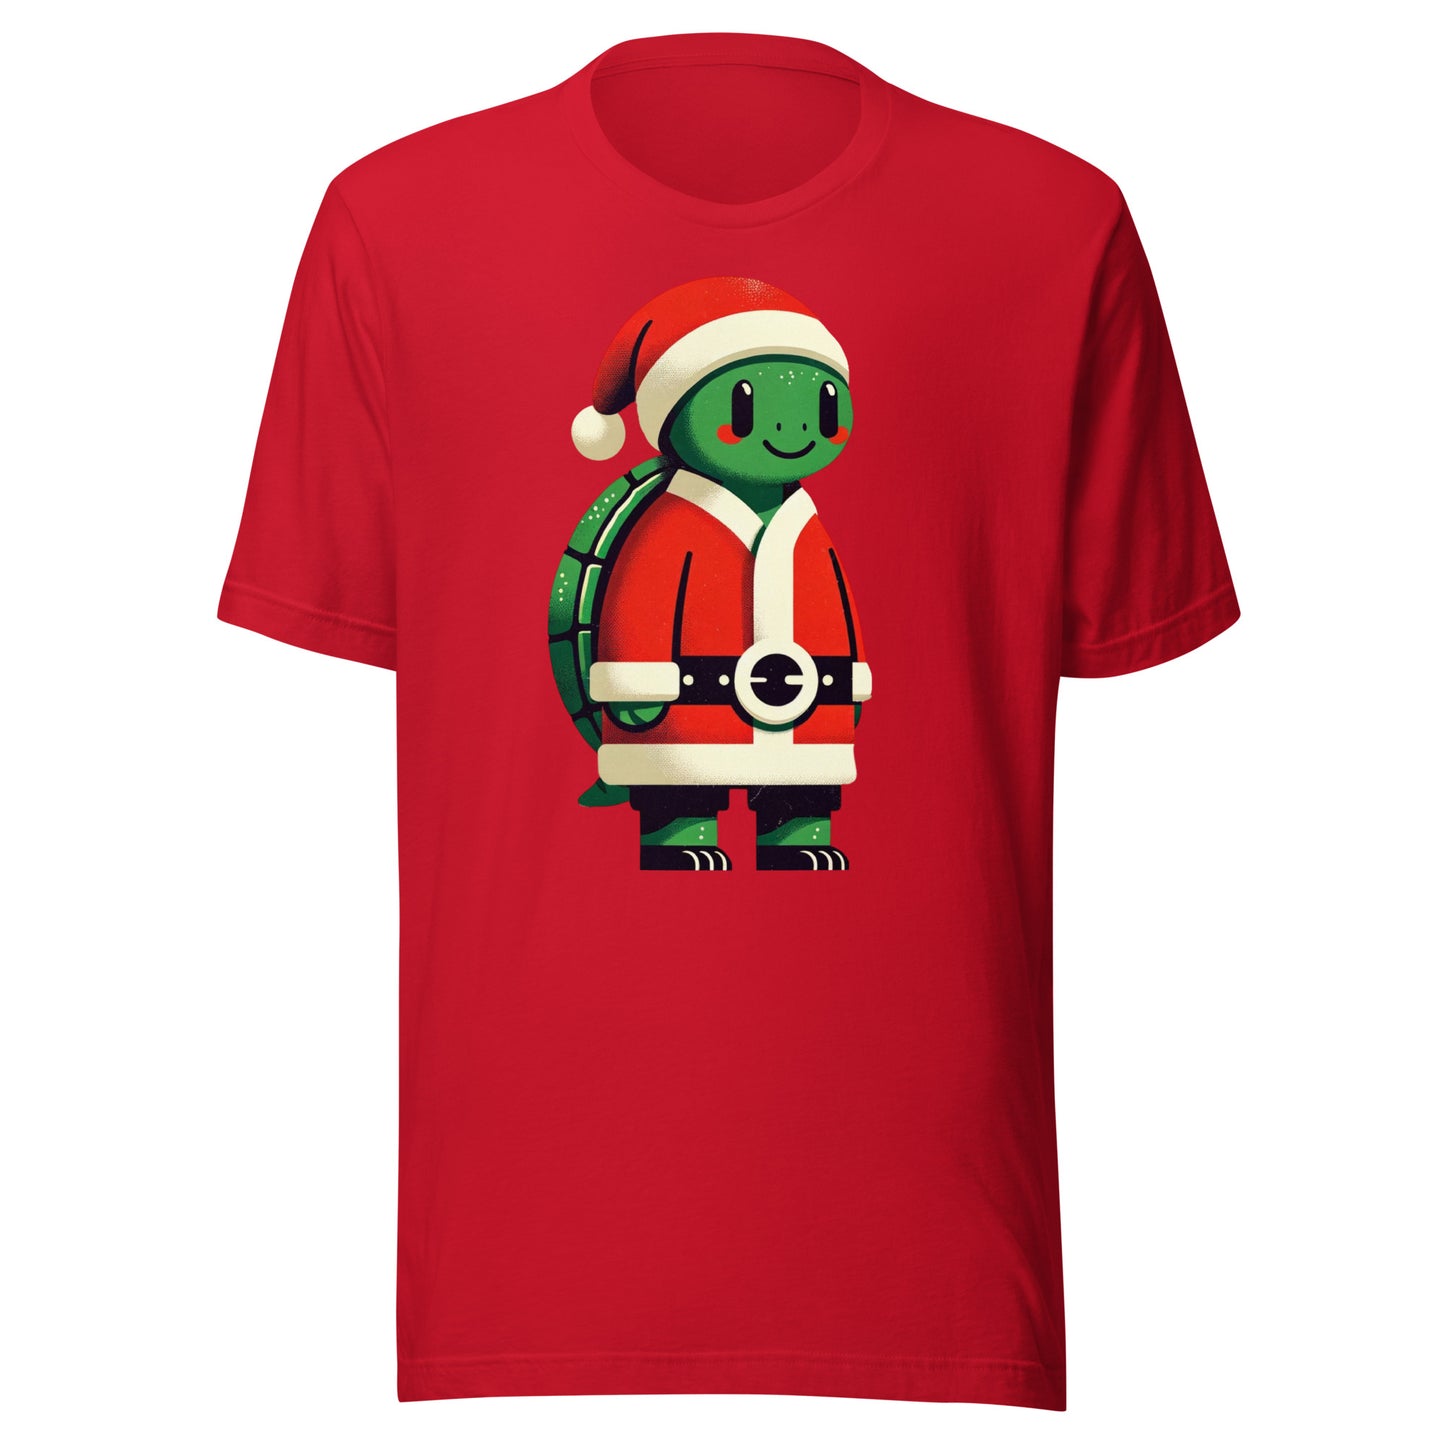 Turtle in a Santa Suit: Spreading Happy Vintage Christmas Cheer Unisex t-shirt